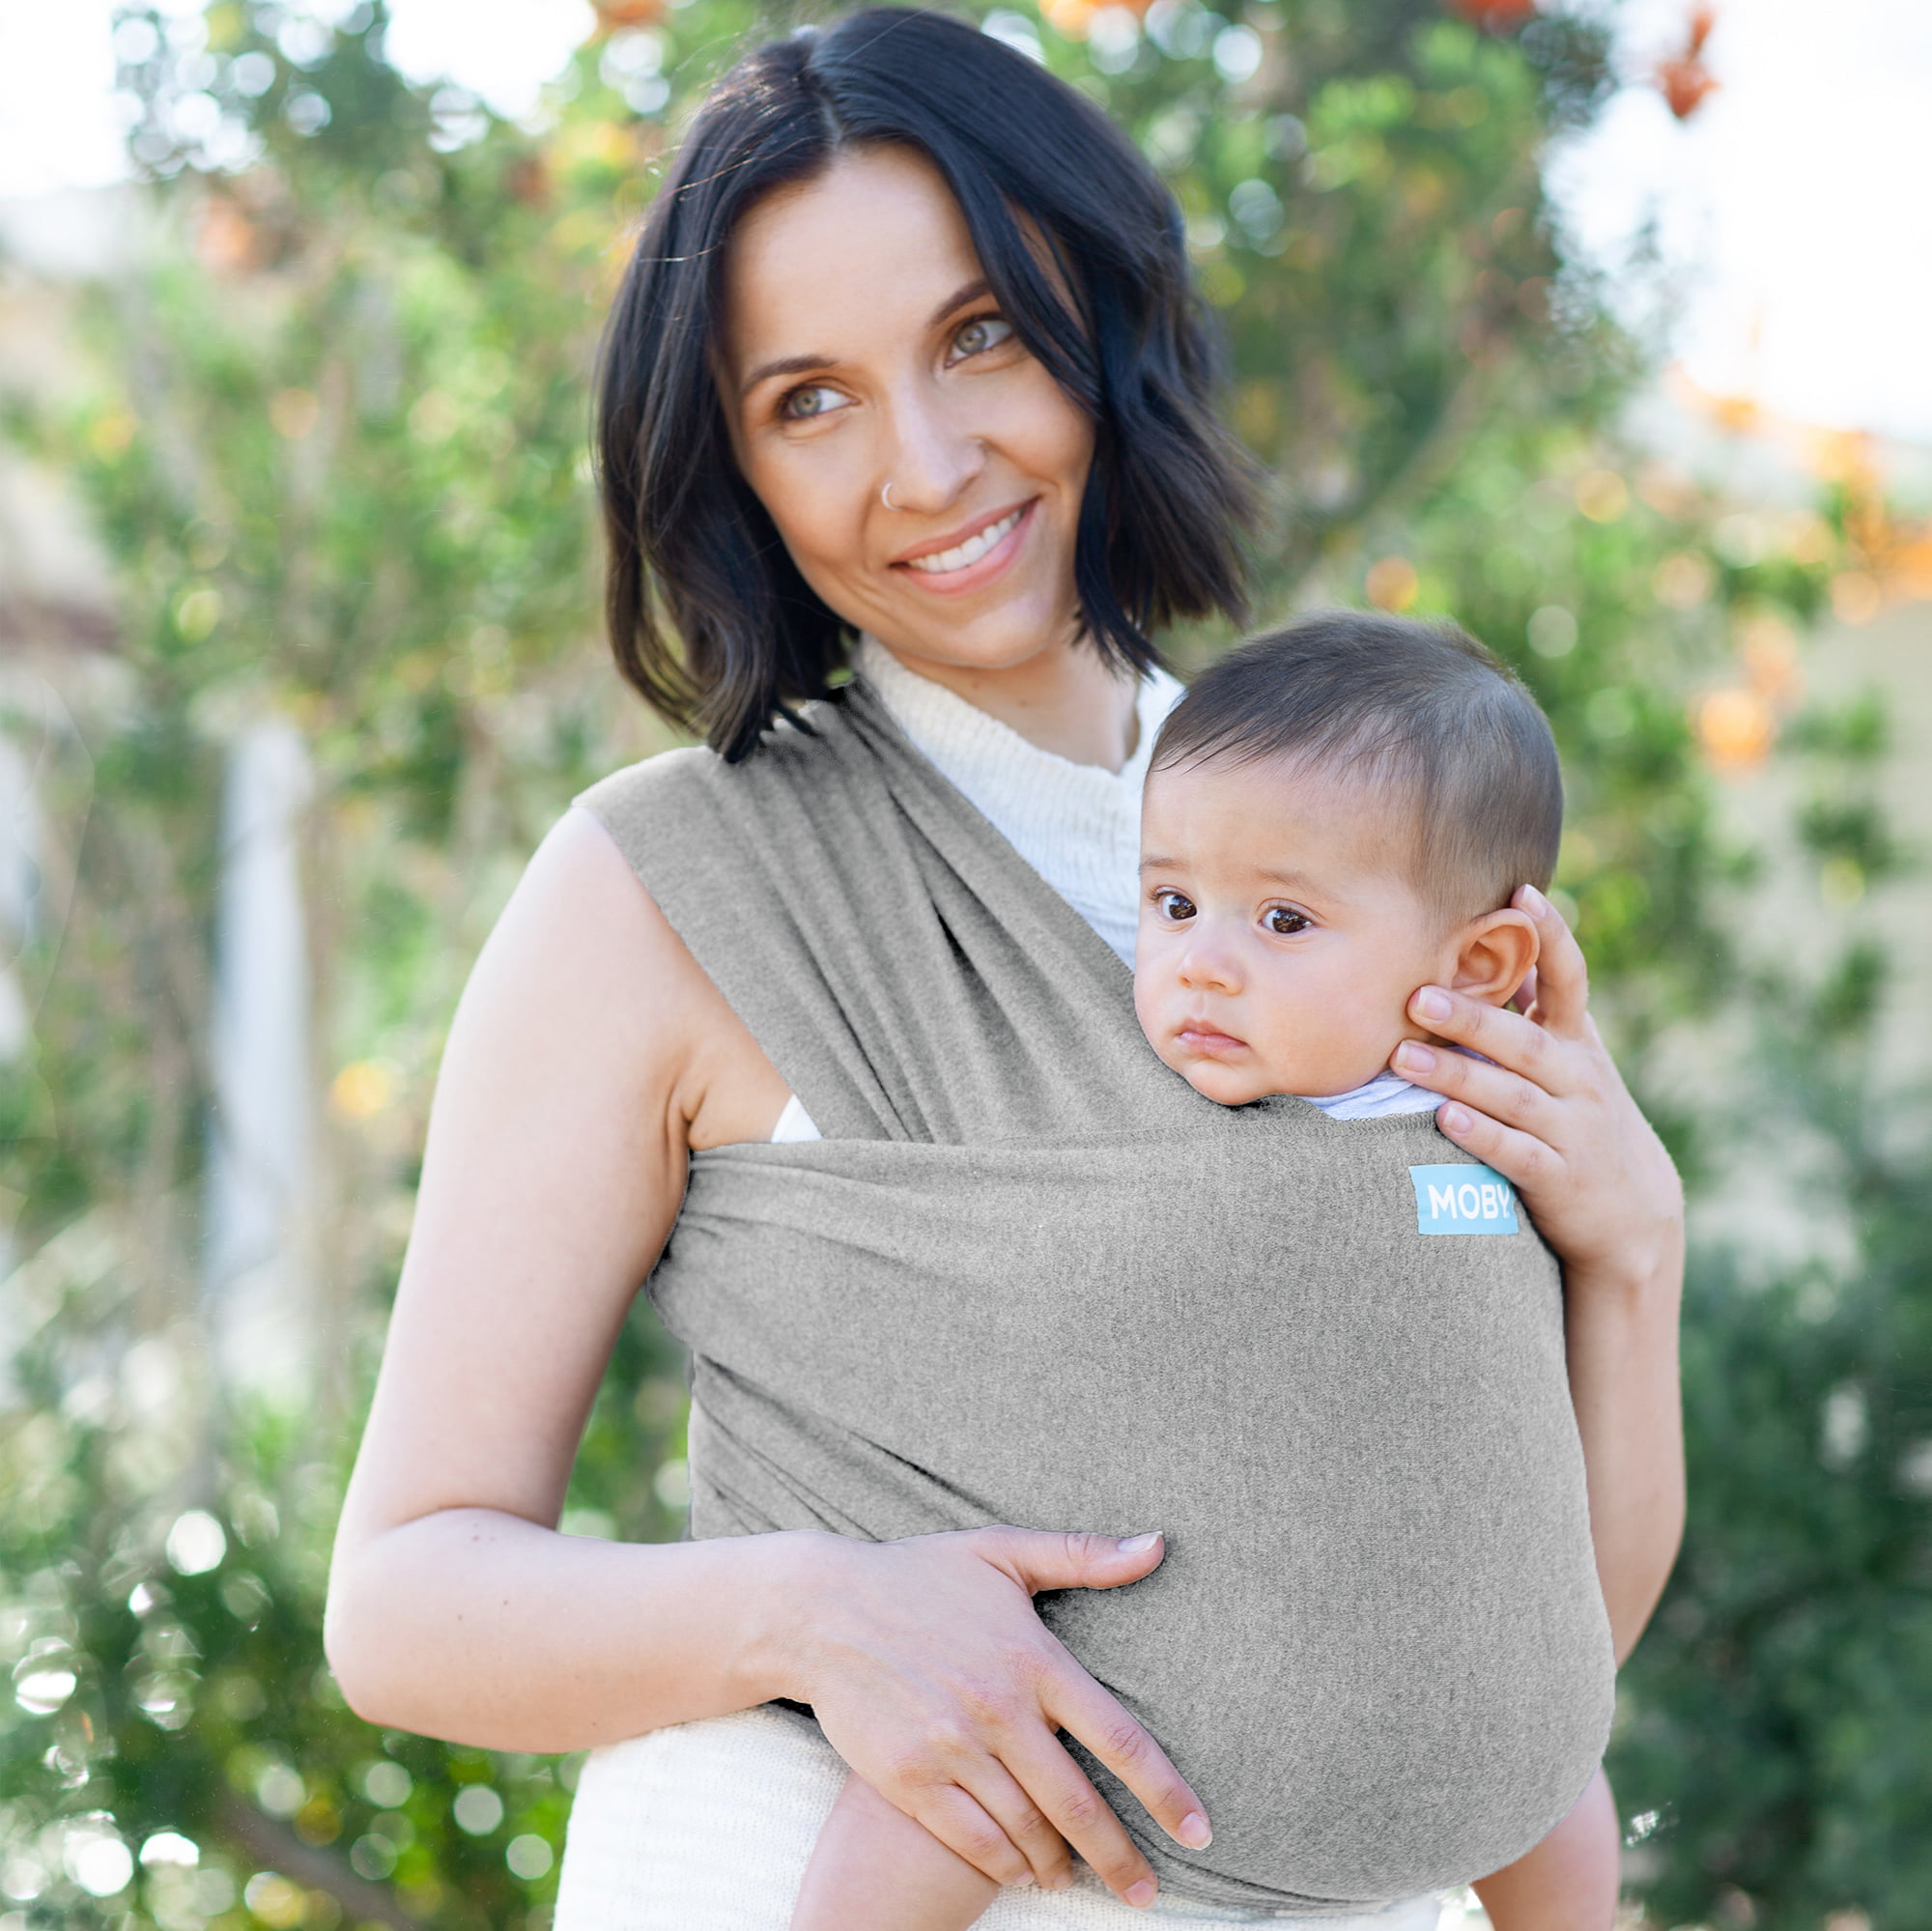 Moby Wrap Classic Baby Wrap Carrier in 